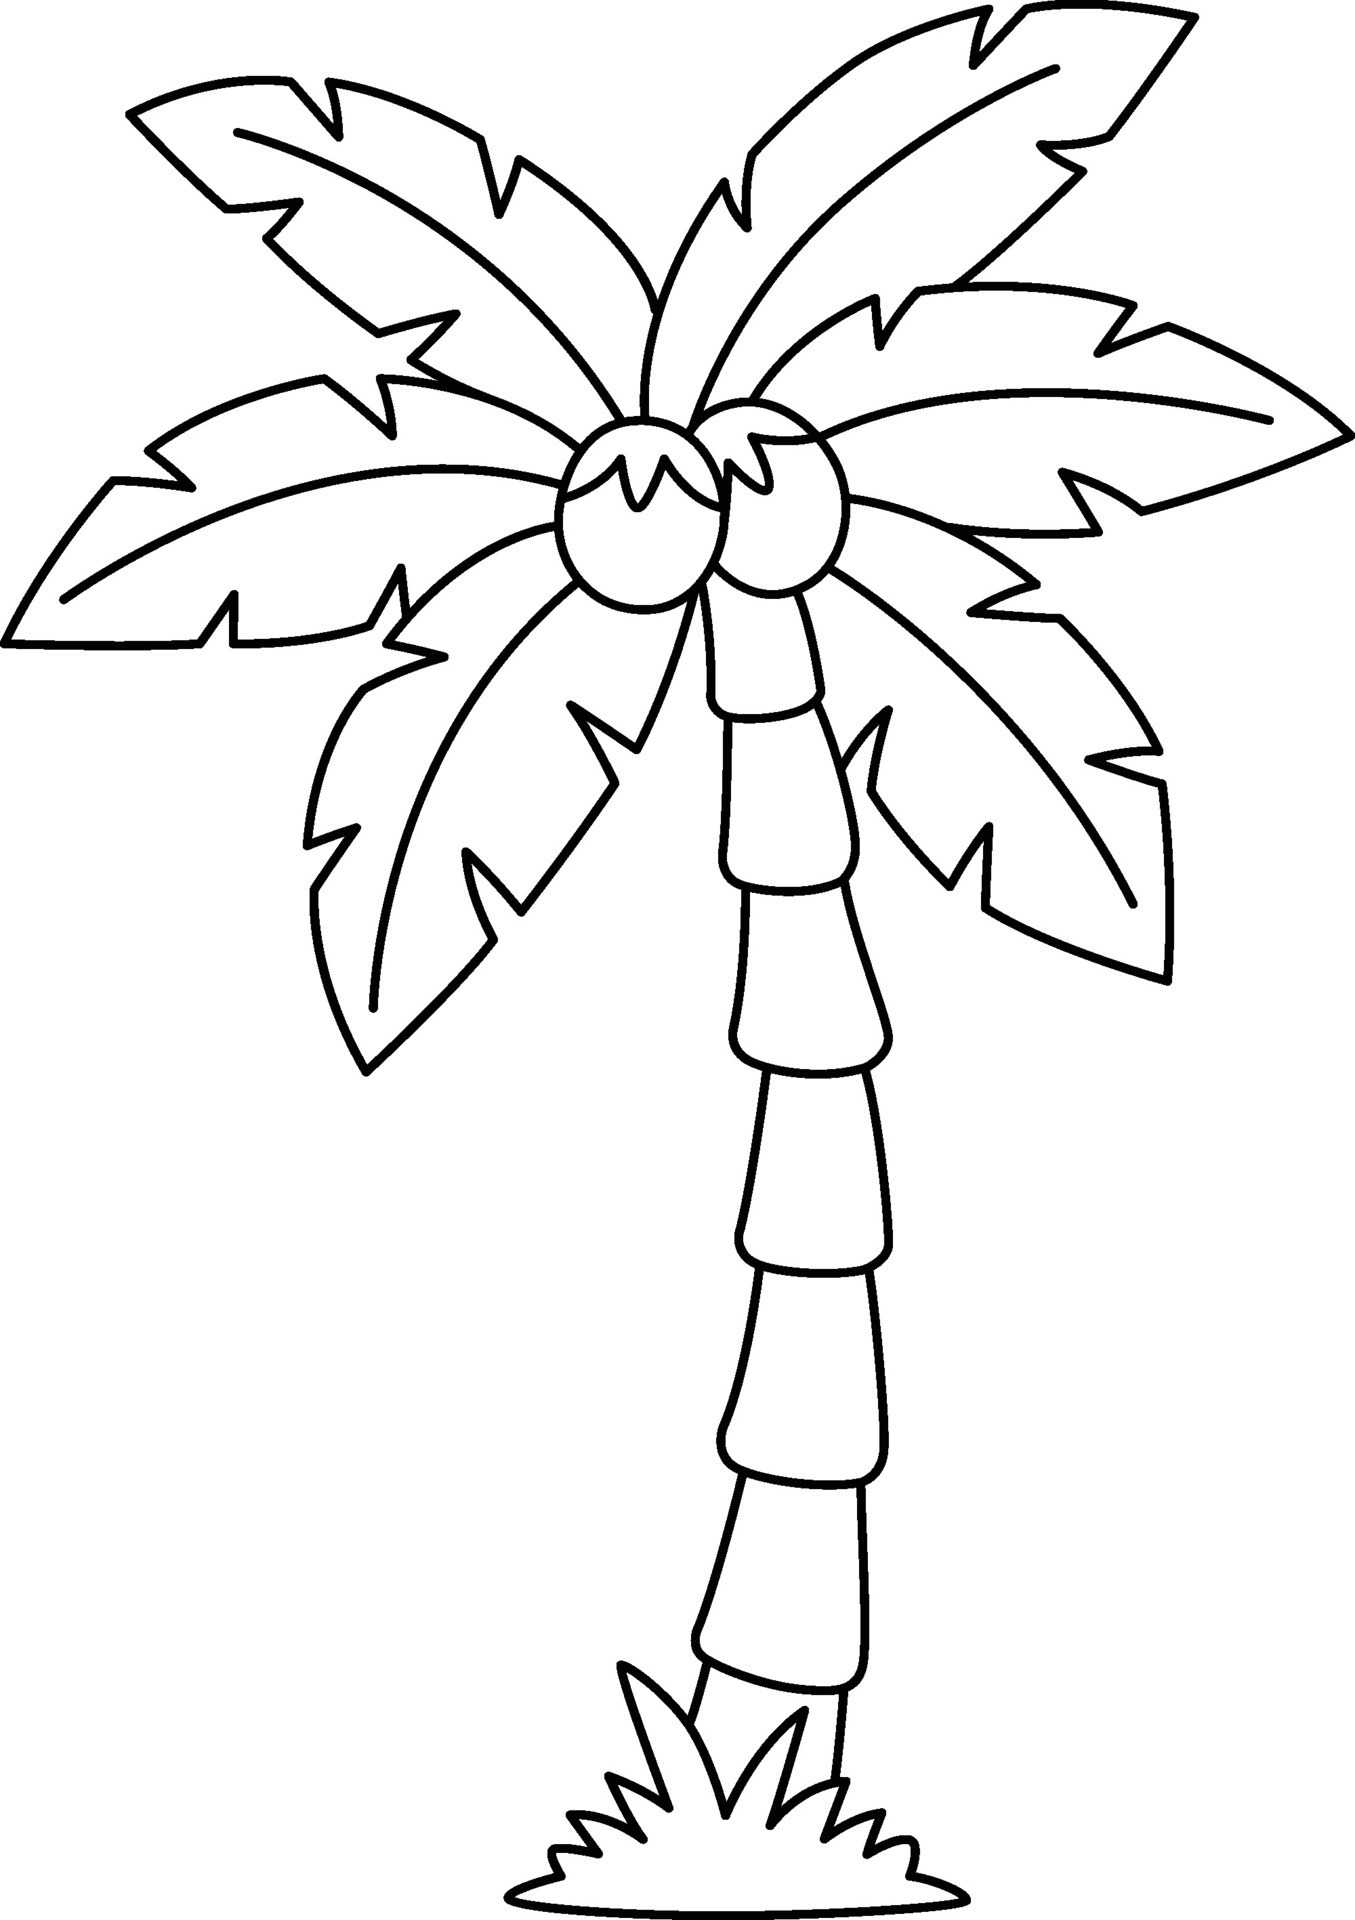 Coconut Tree Isolated Coloring Page for Kids 26493063 Vector Art at ...